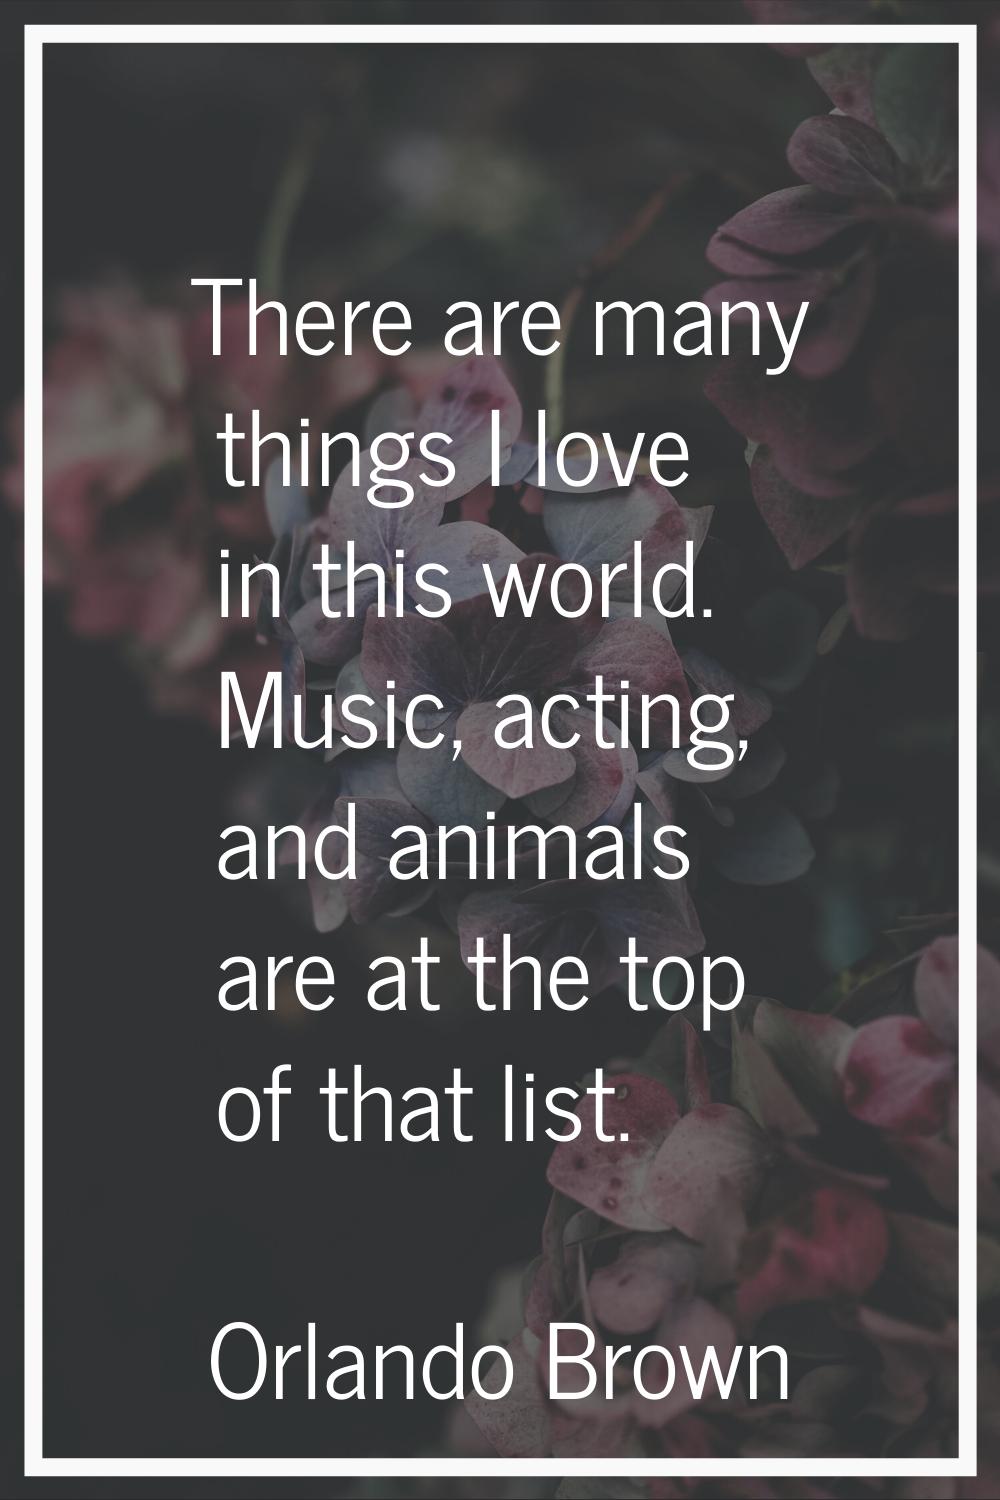 There are many things I love in this world. Music, acting, and animals are at the top of that list.